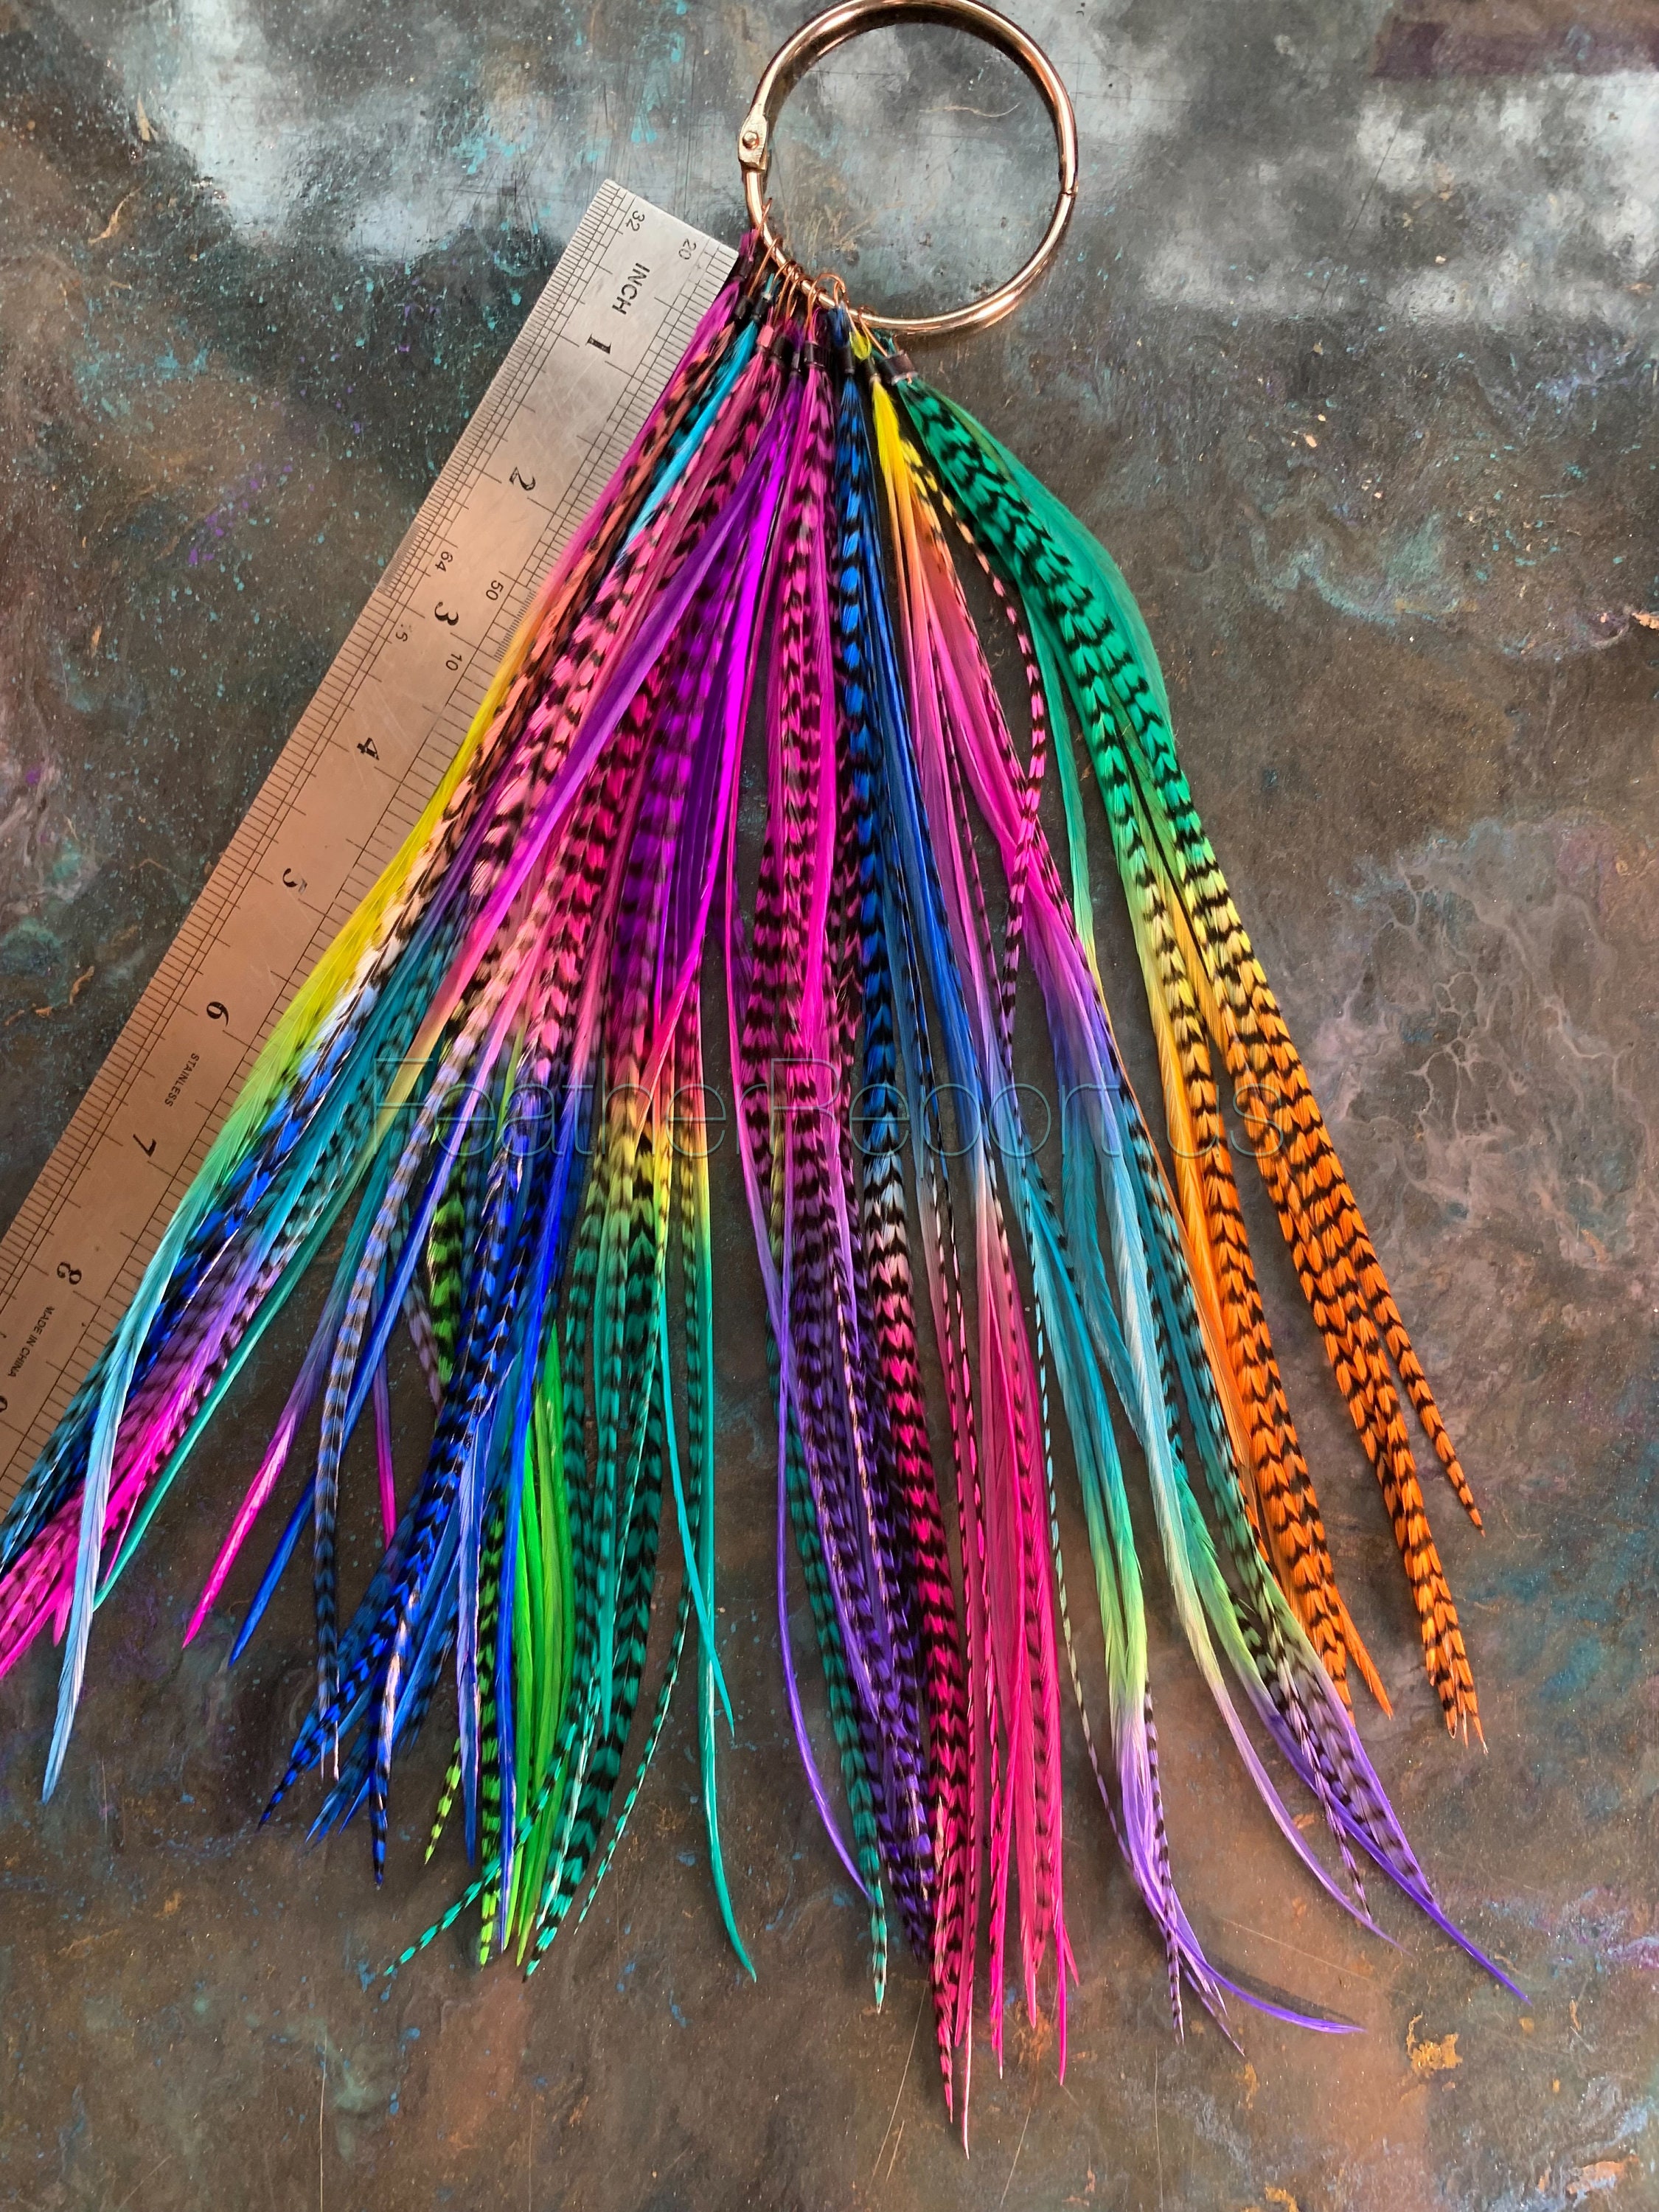 Hair Feathers Rainbow Hair Accessories Long Feather Hair Extensions Rainbow  Colored Real Rooster Feather Extensions DIY Kit 